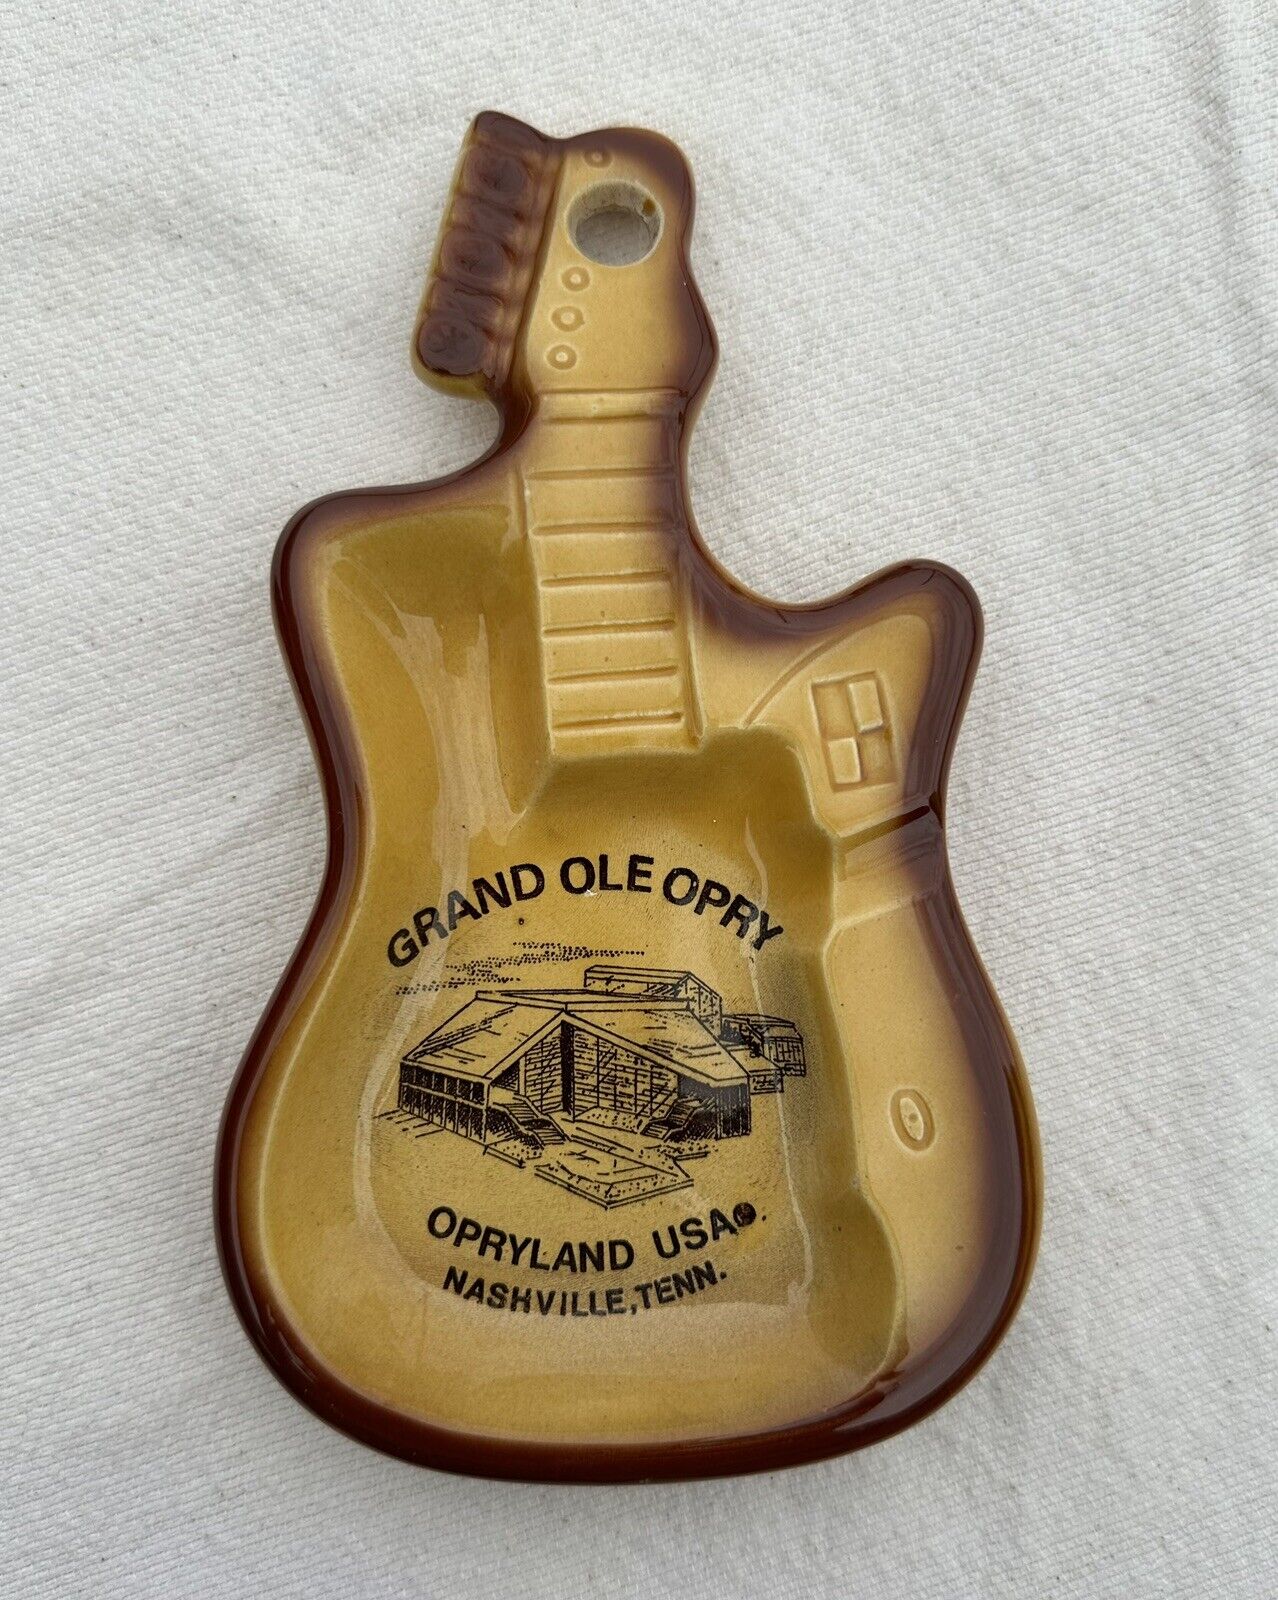 Vintage Brown Grand Ole Opry Guitar Souvenir Ashtray Nashville, Tennessee